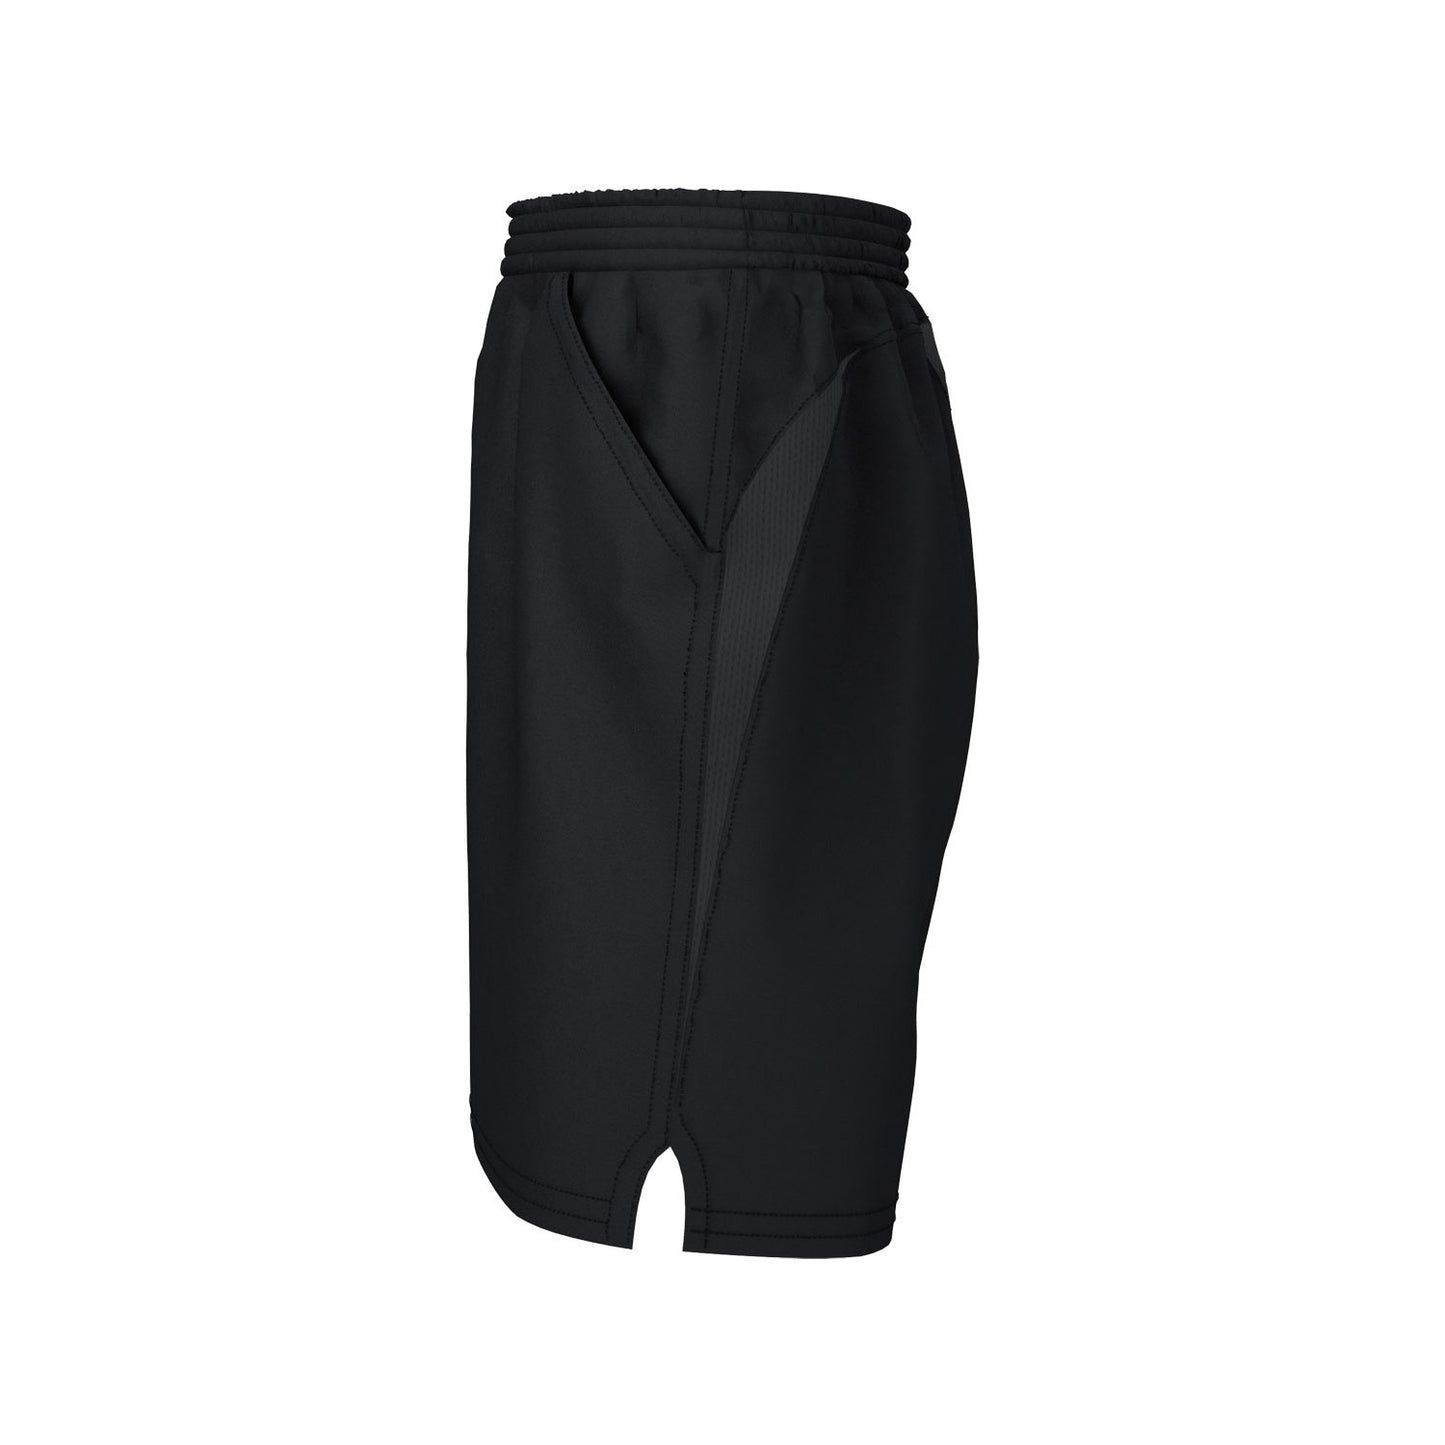 Downing College Cricket Club Training Shorts